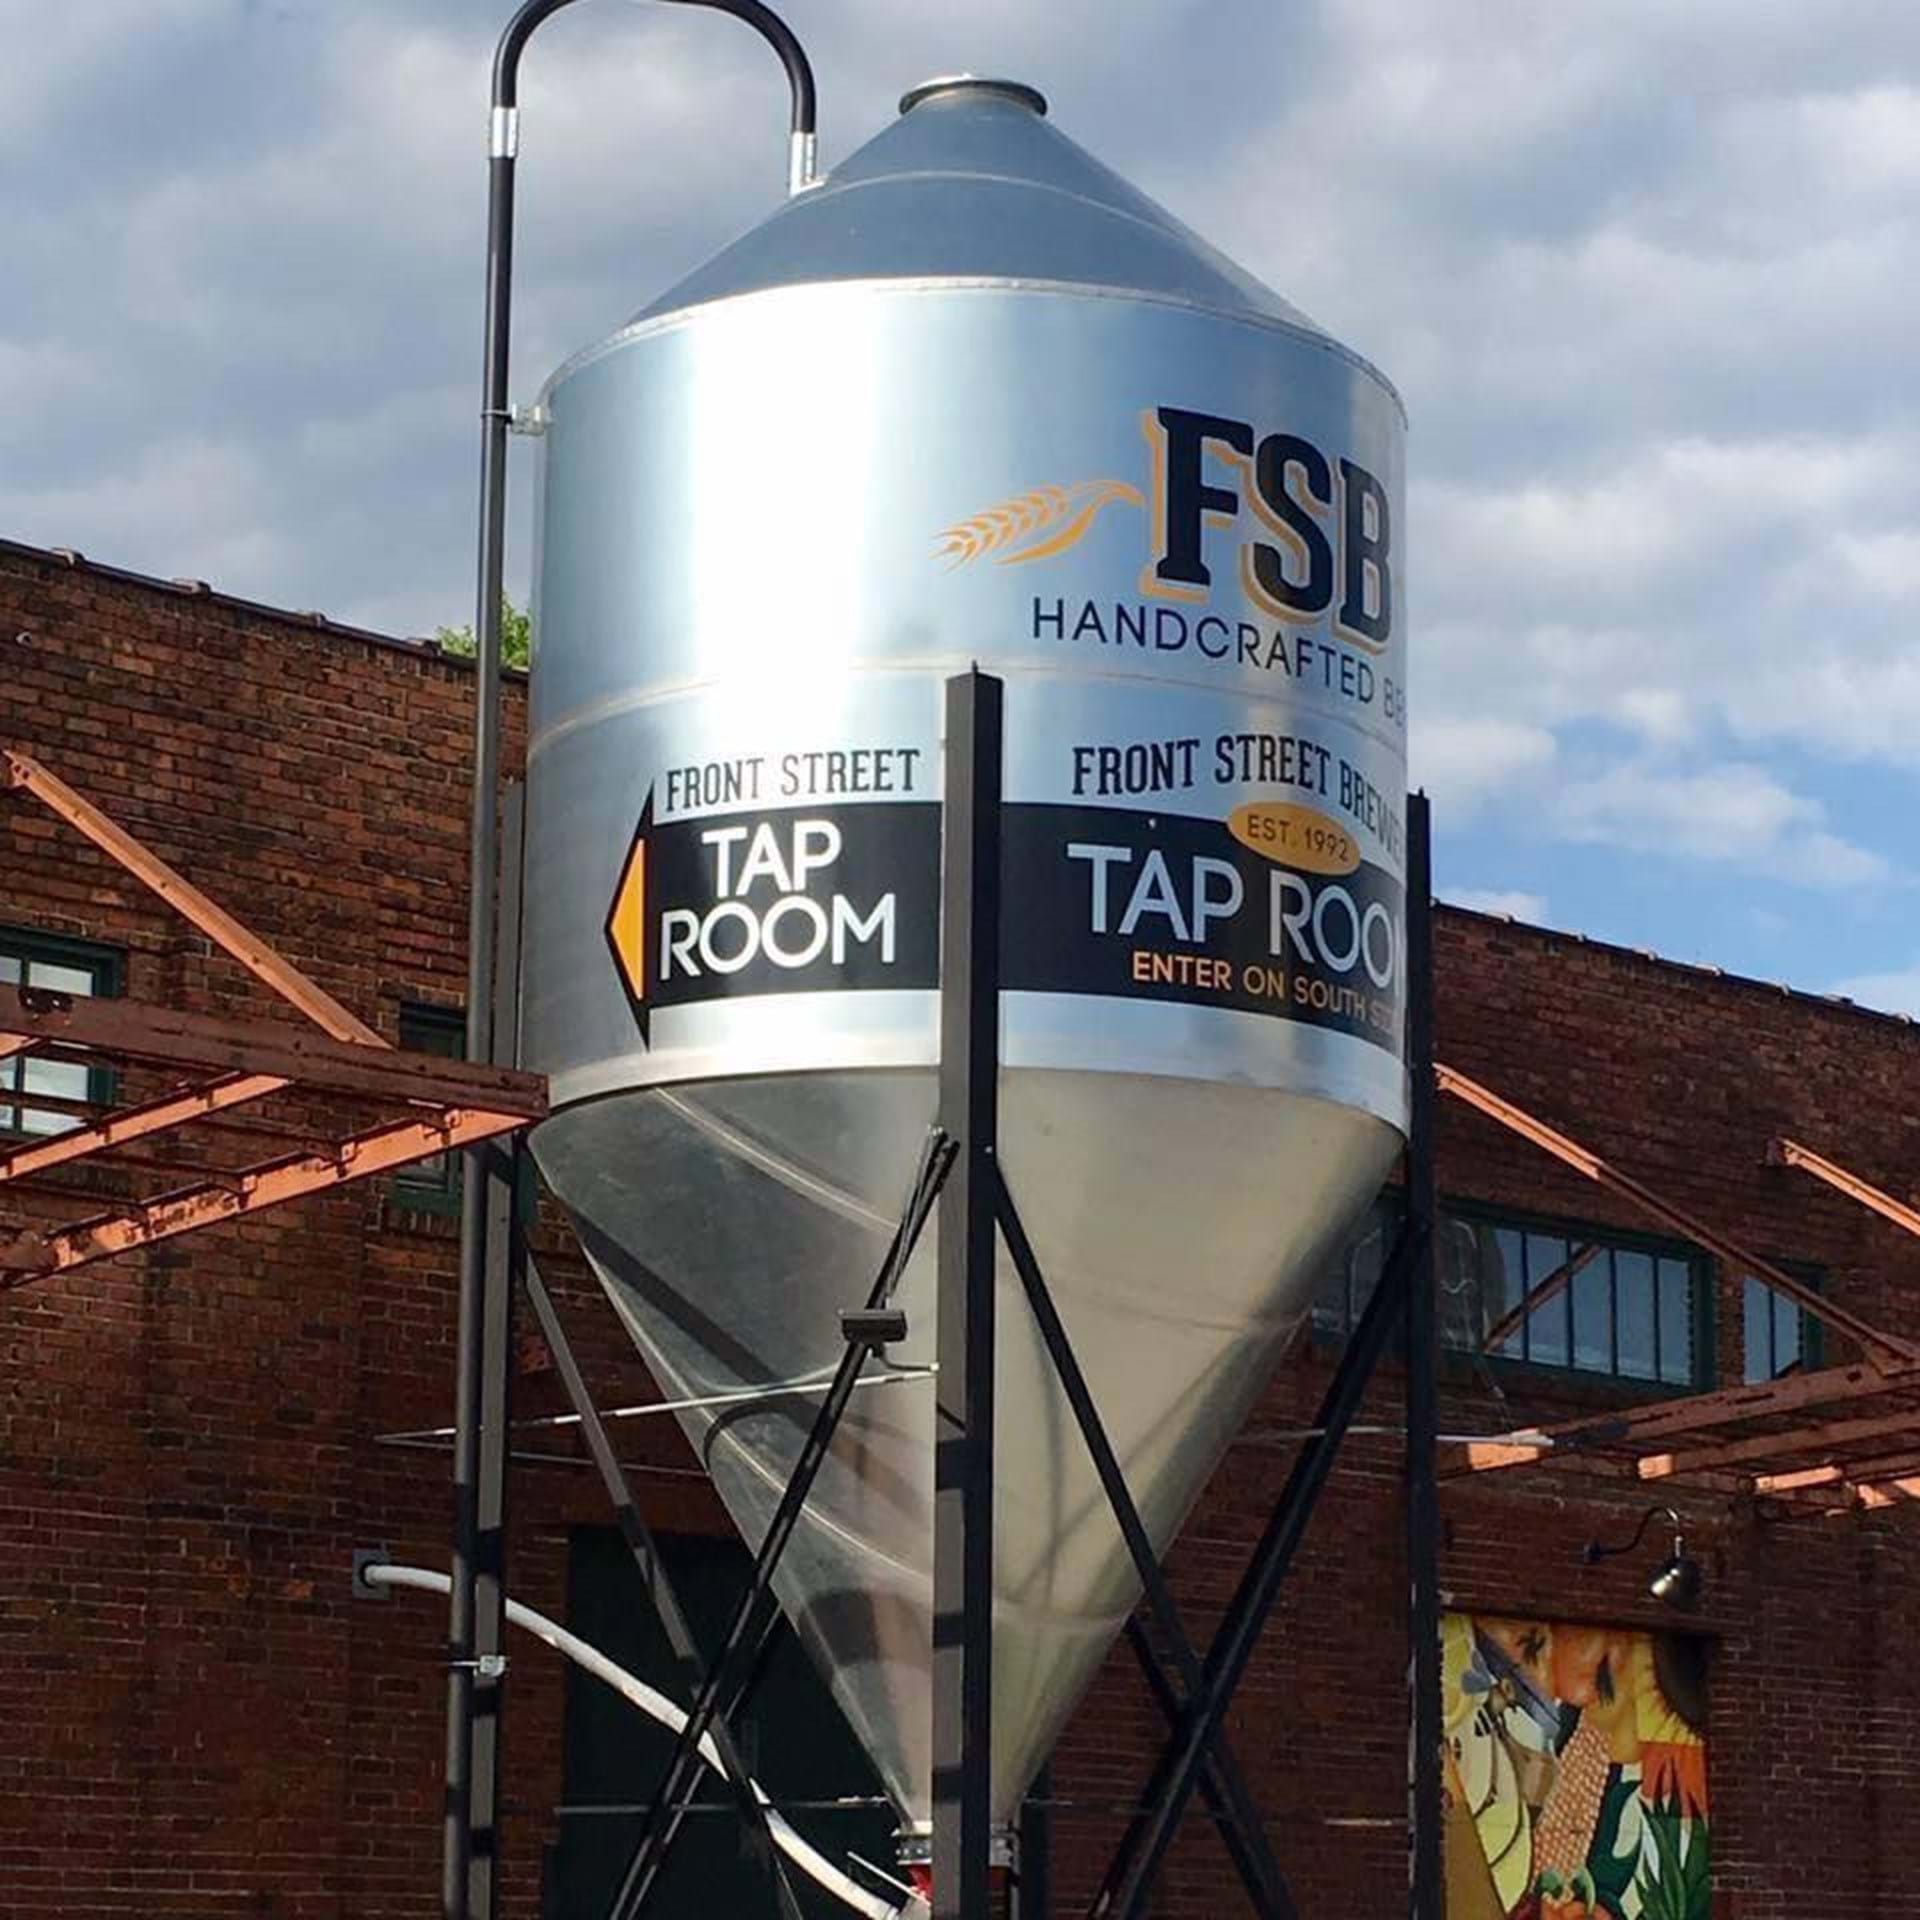 Look for the big silo on River Drive!